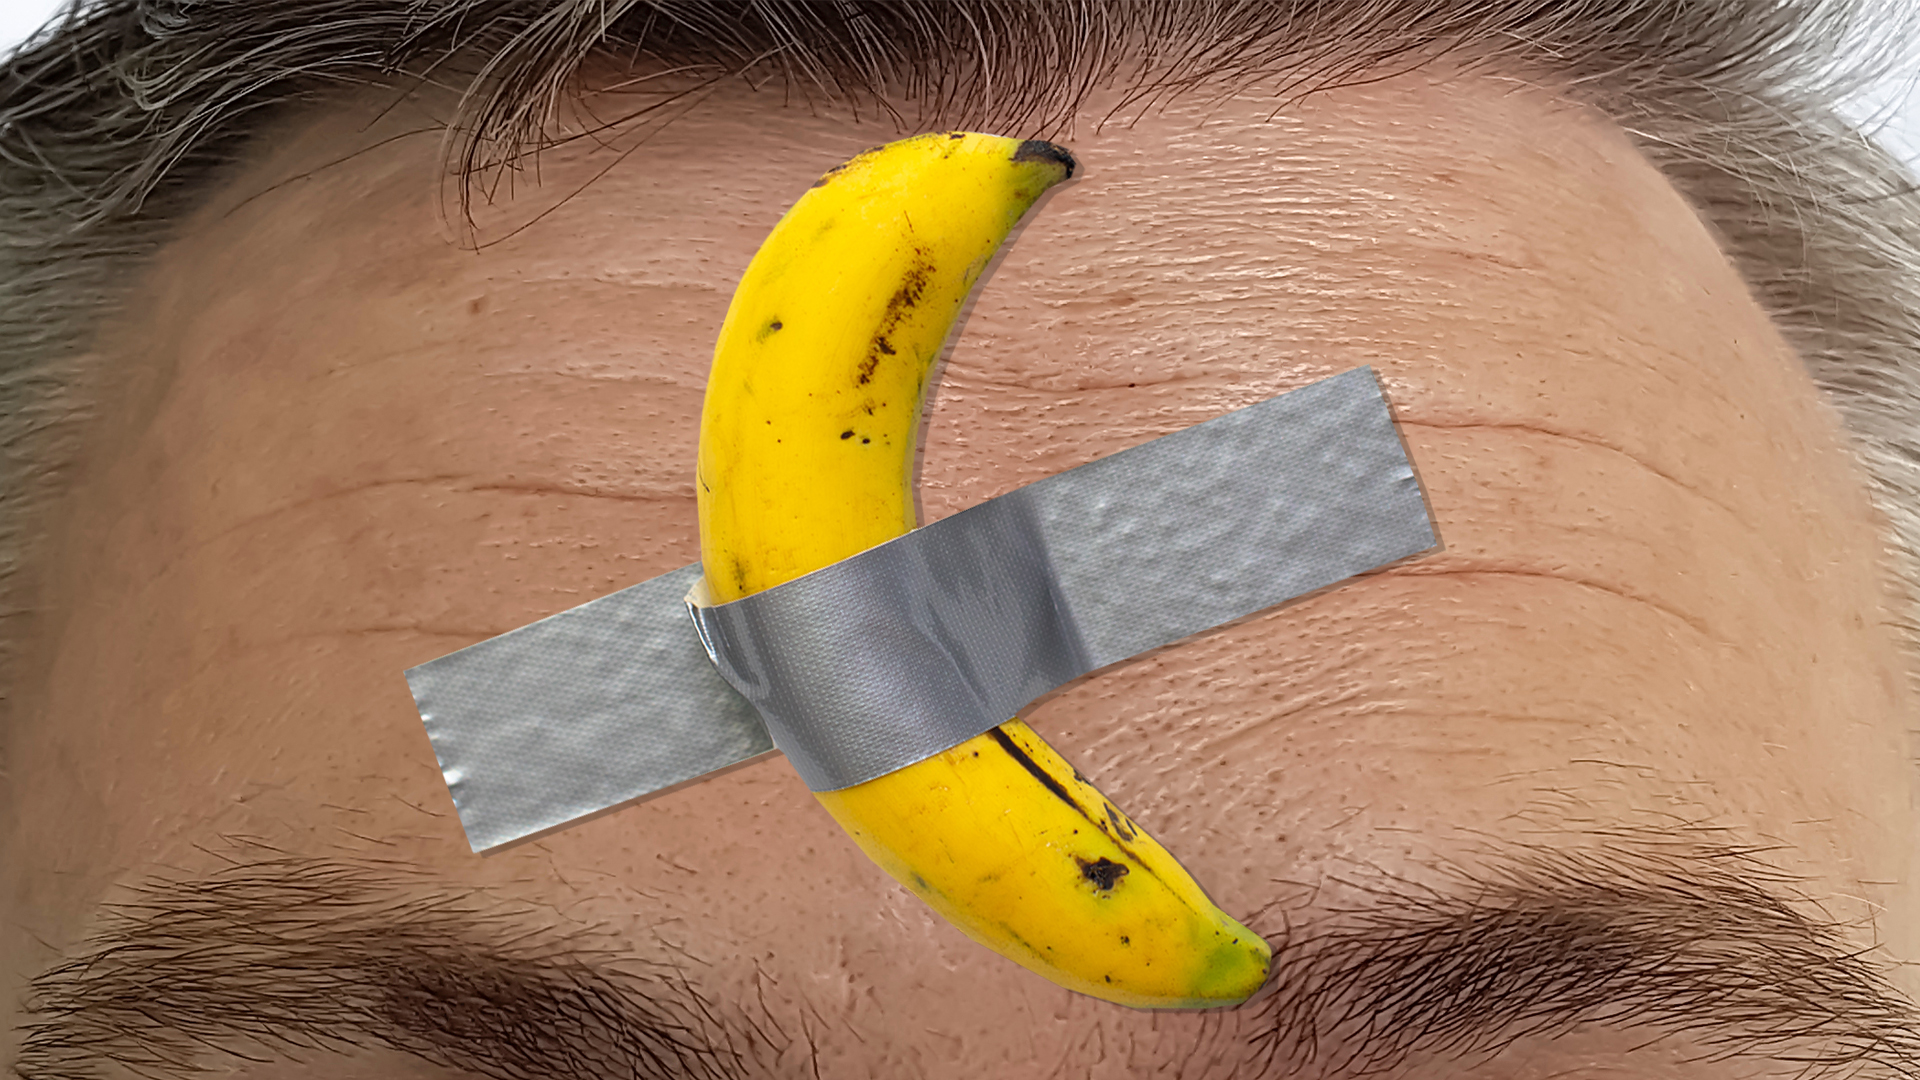 A banana taped on a man's forehead